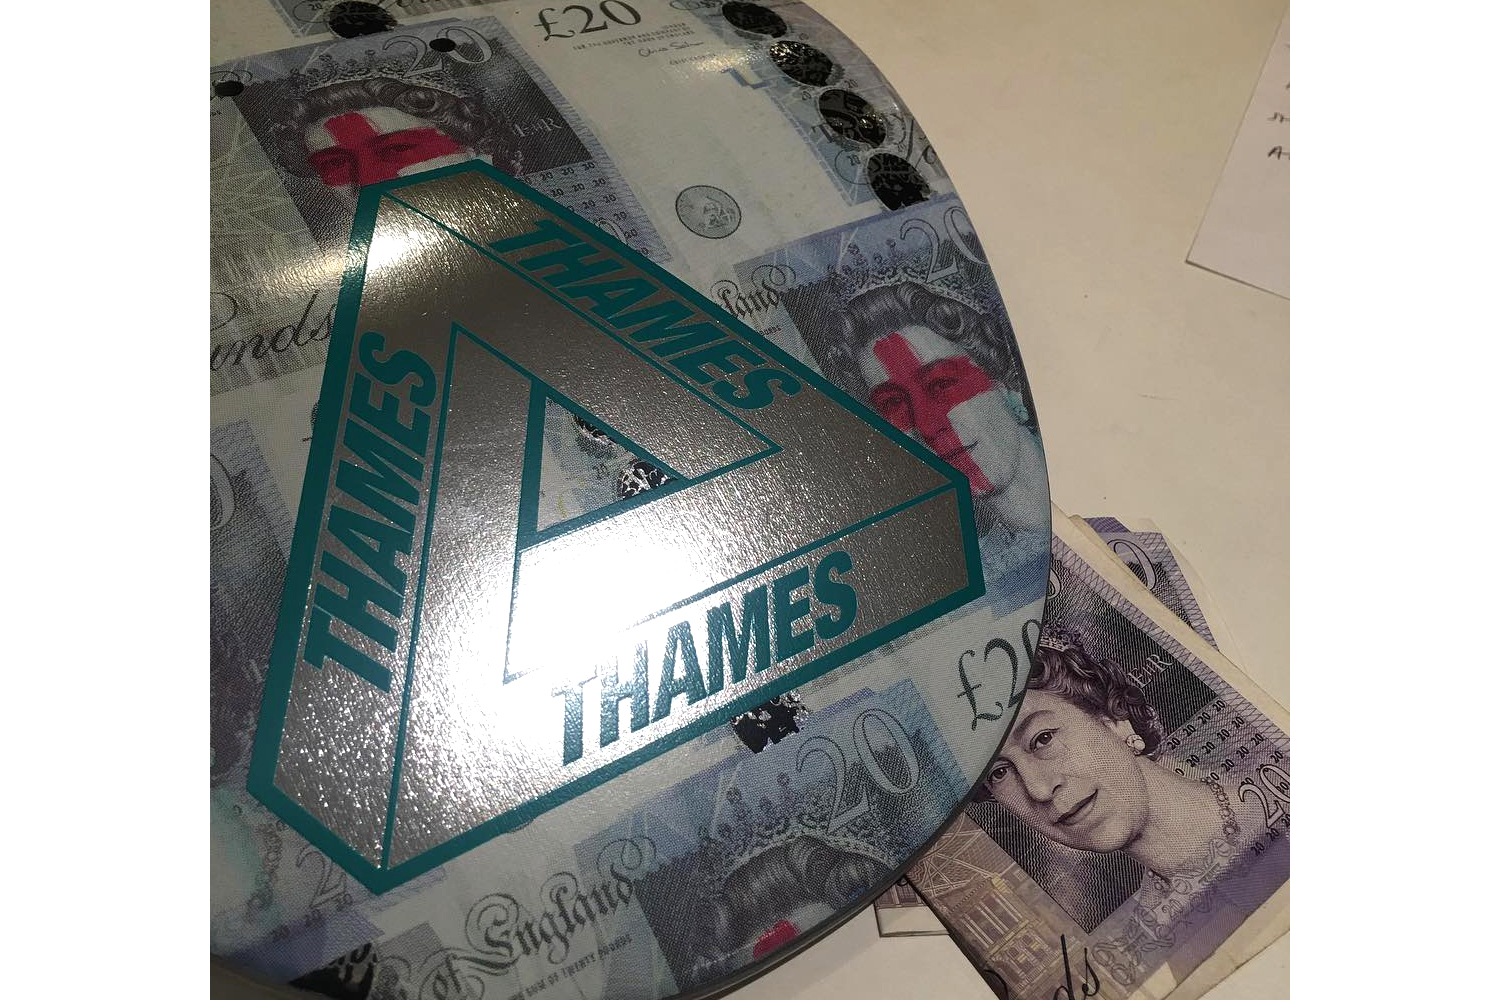 Thames London x Palace Skateboards Collab?